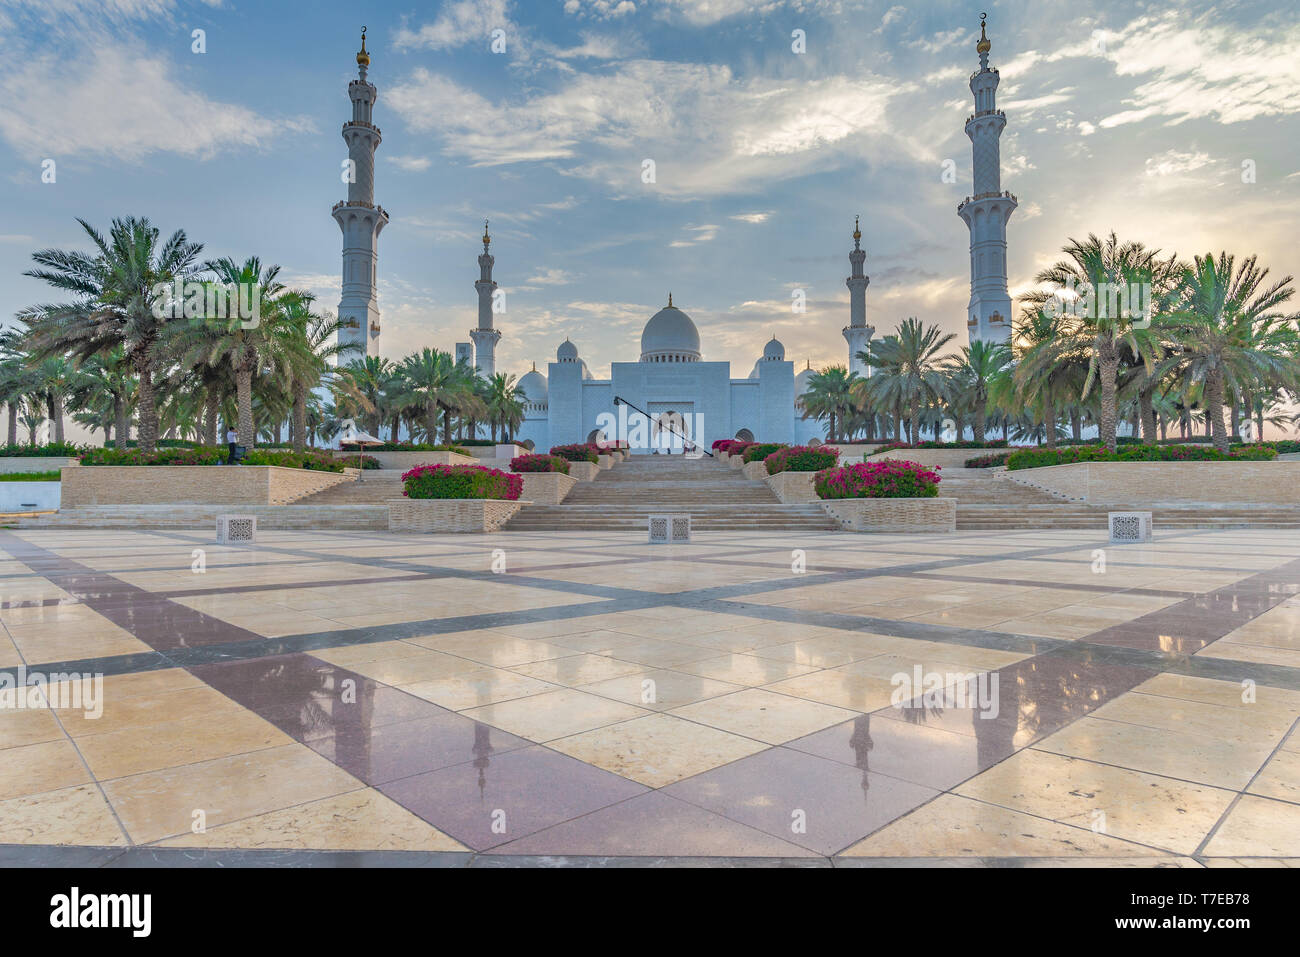 Axial view of the Great Mosque of Abu Dhabi at the end of the afternoon with shinny paving in the foreground, United Arab Emirate Stock Photo